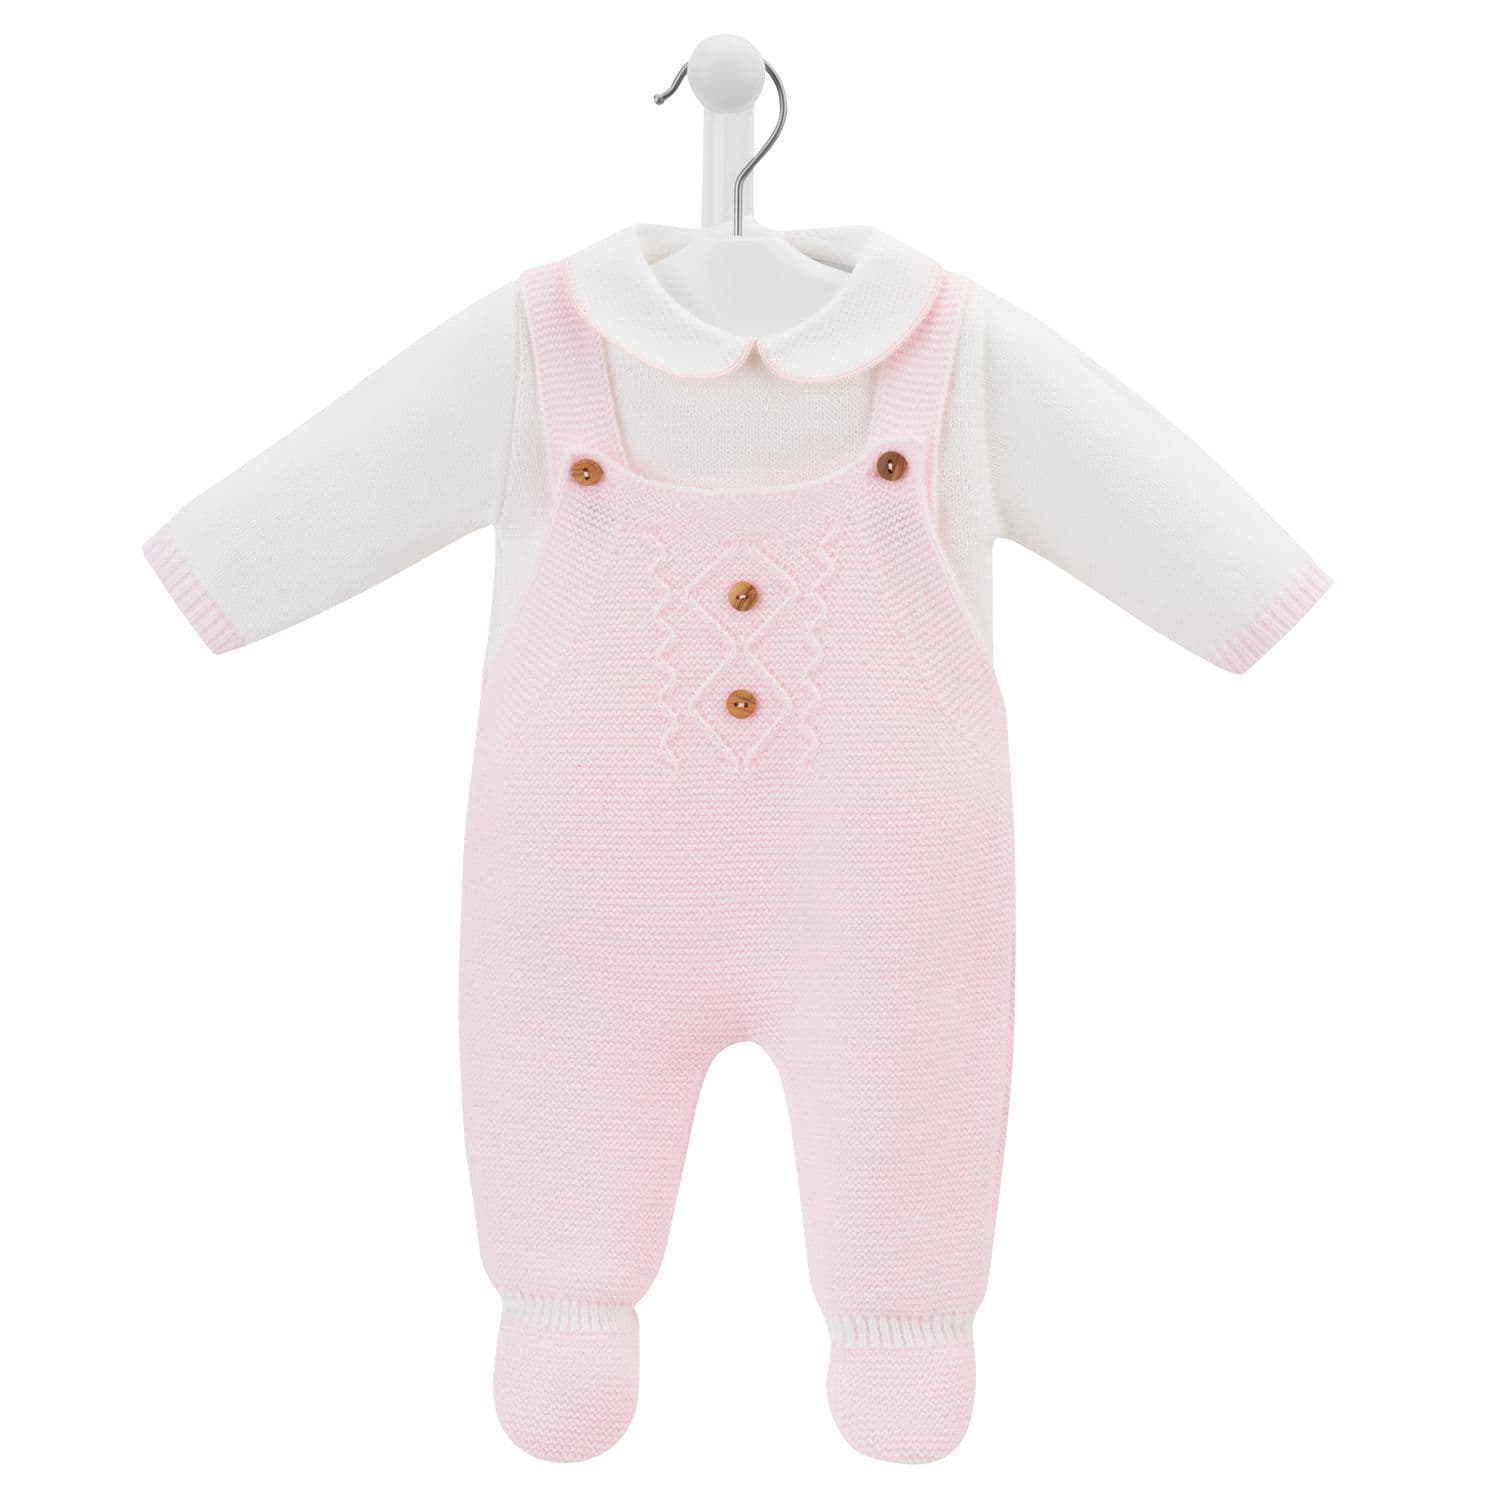 This stylish baby girls pink knitted dungaree & top set is expertly crafted from Portugal for Dandelion. Featuring a pique Peter Pan collar on the jumper and two wooden buttons on the straps for easy dressing, this set adds a fashionable element to any baby girl's wardrobe. Available in sizes newborn to 9 months.